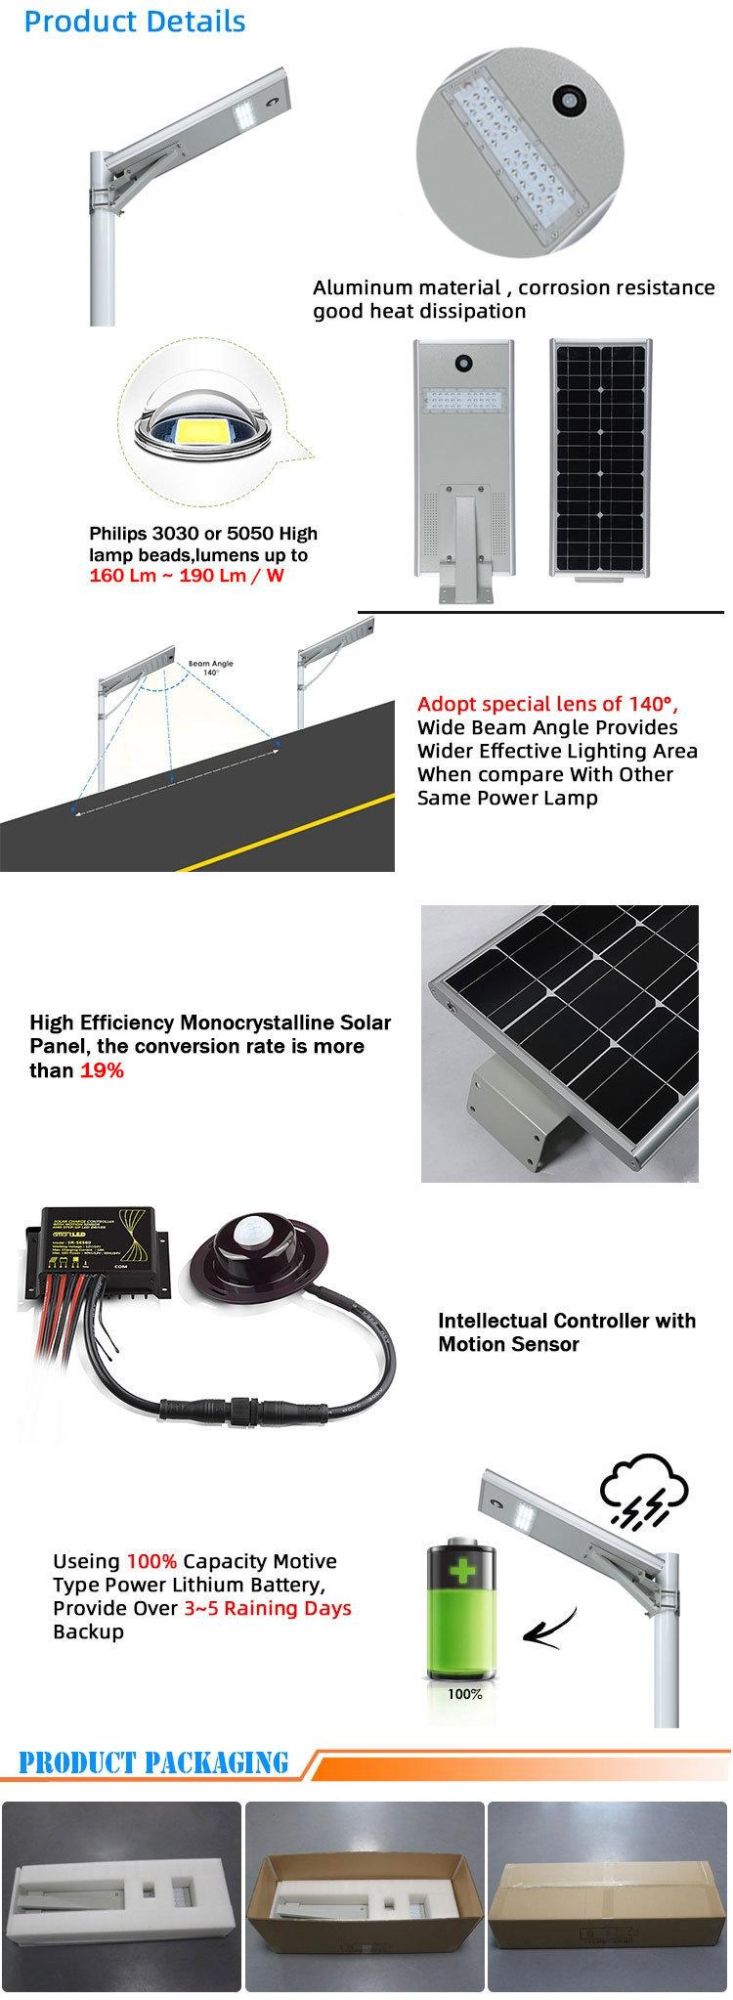 15W All in One Intergrated Solar Panel Lights Outdoor Die-Casting Aluminum Material IP65 LED Solar Street Light